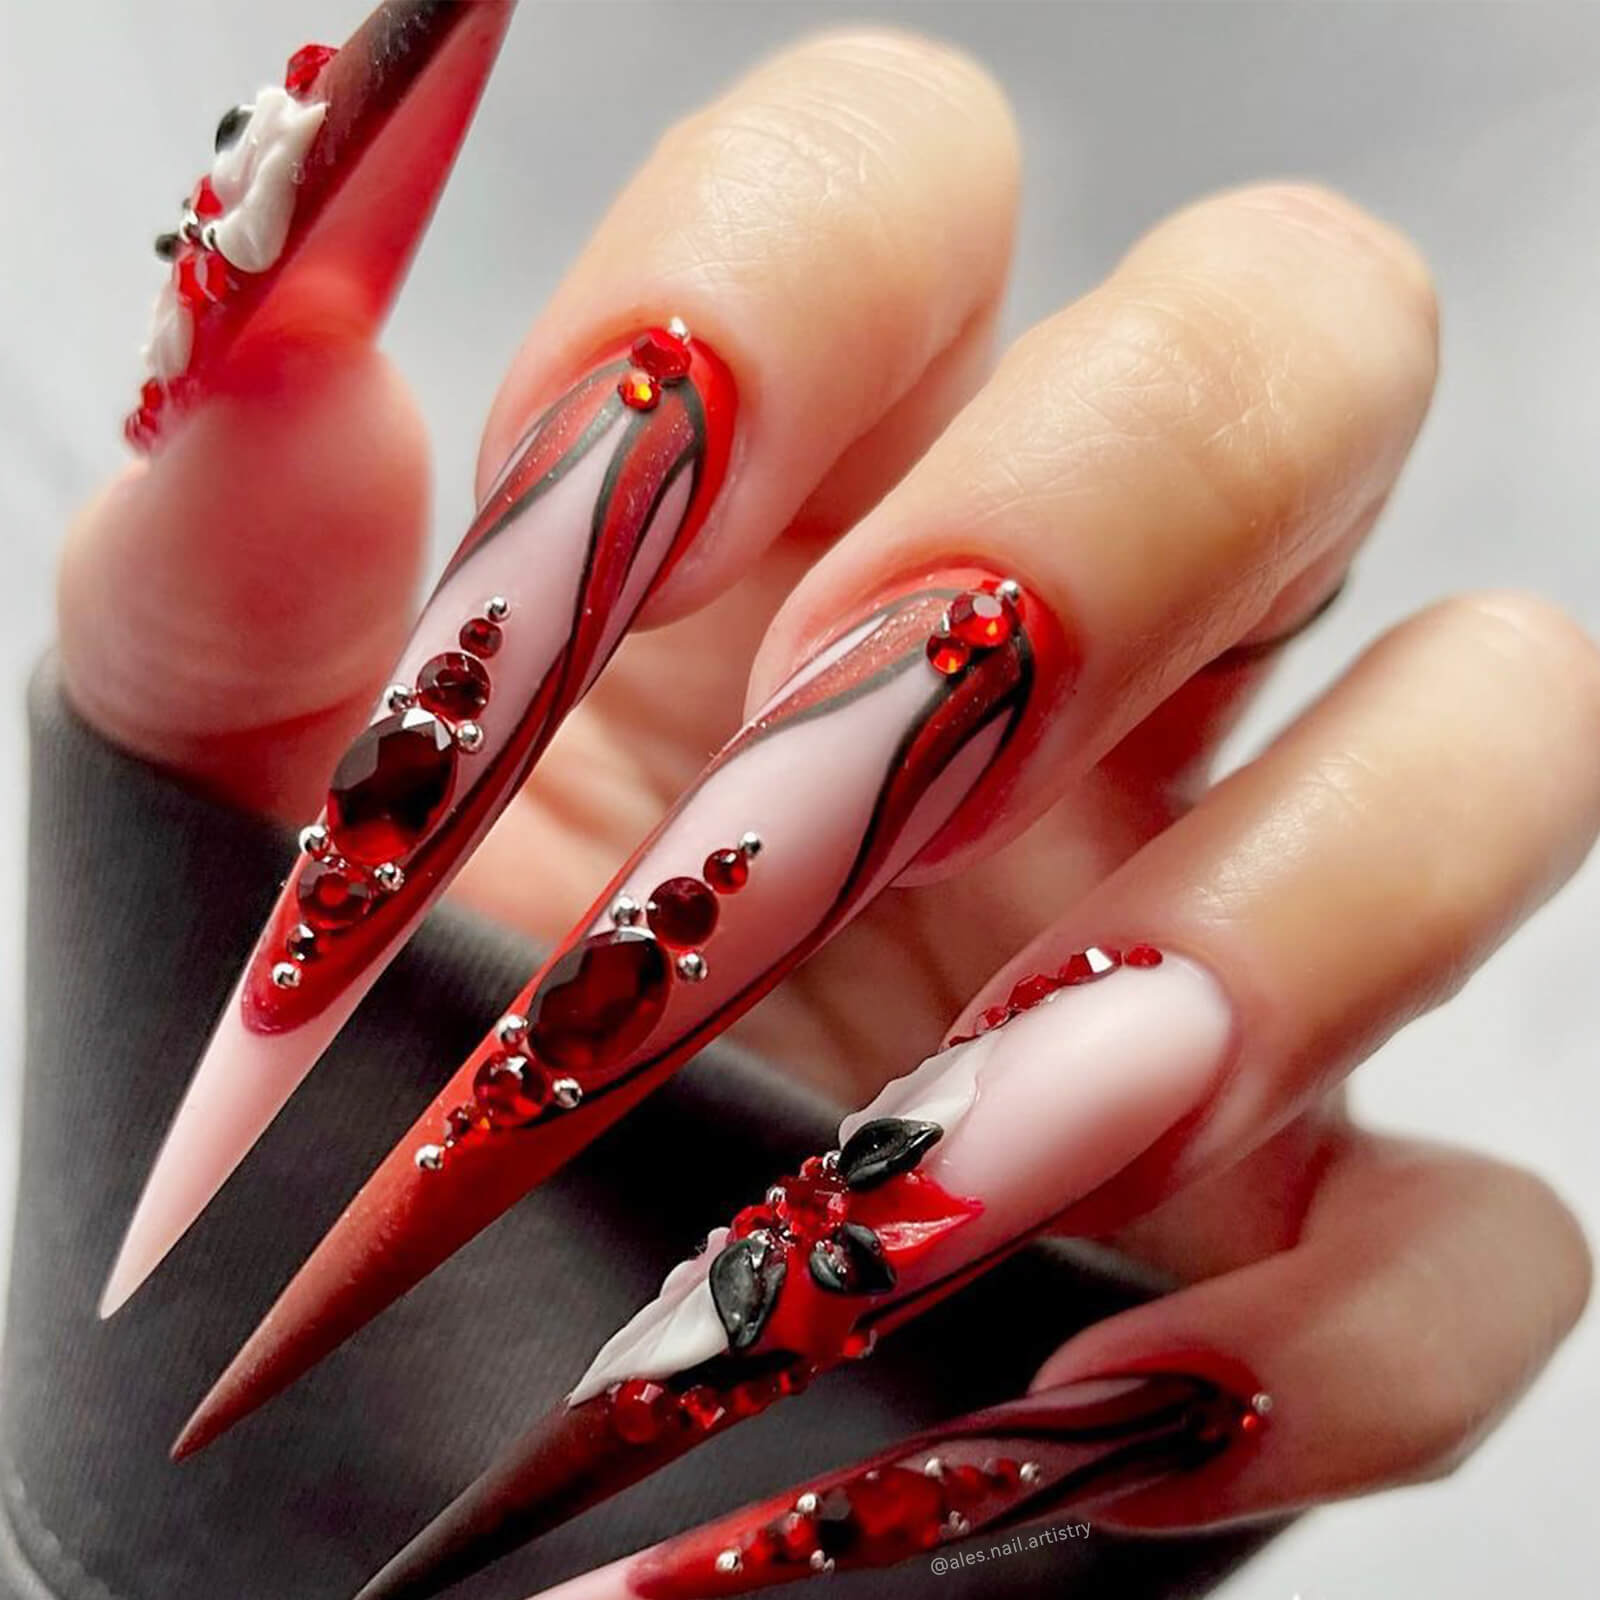 60 Nail Designs For Short Nails | Move Manicure Singapore